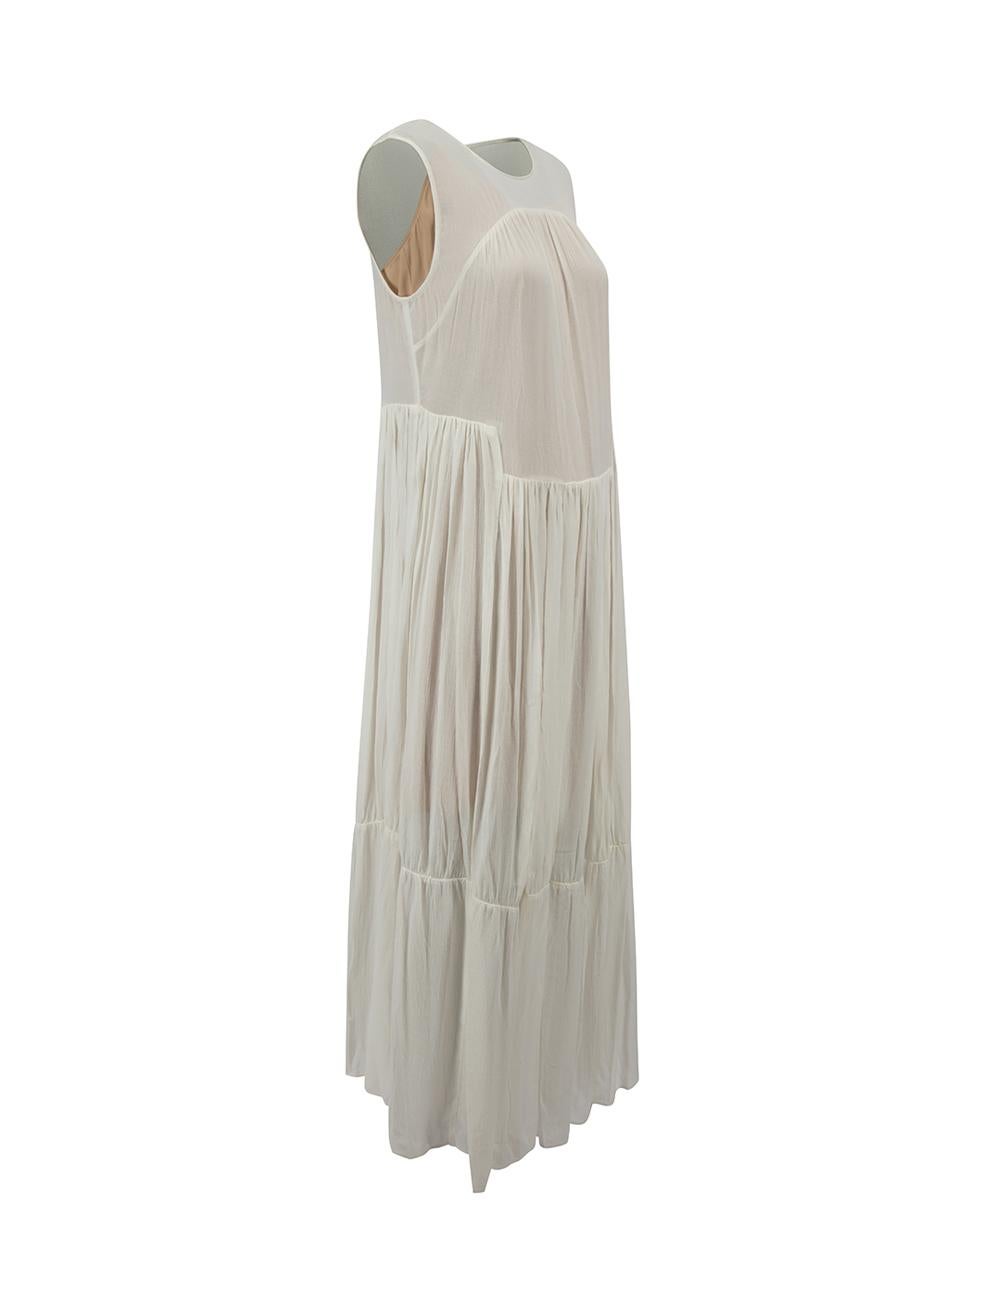 CONDITION is Never Worn, with tags. No visible wear to dress is evident on this used Vince designer resale item.



Details


White

Viscose

Dress

Sleeveless

Round neck

Midi length

Gathered detail

Tiered skirt

Visible beige under dress

Back